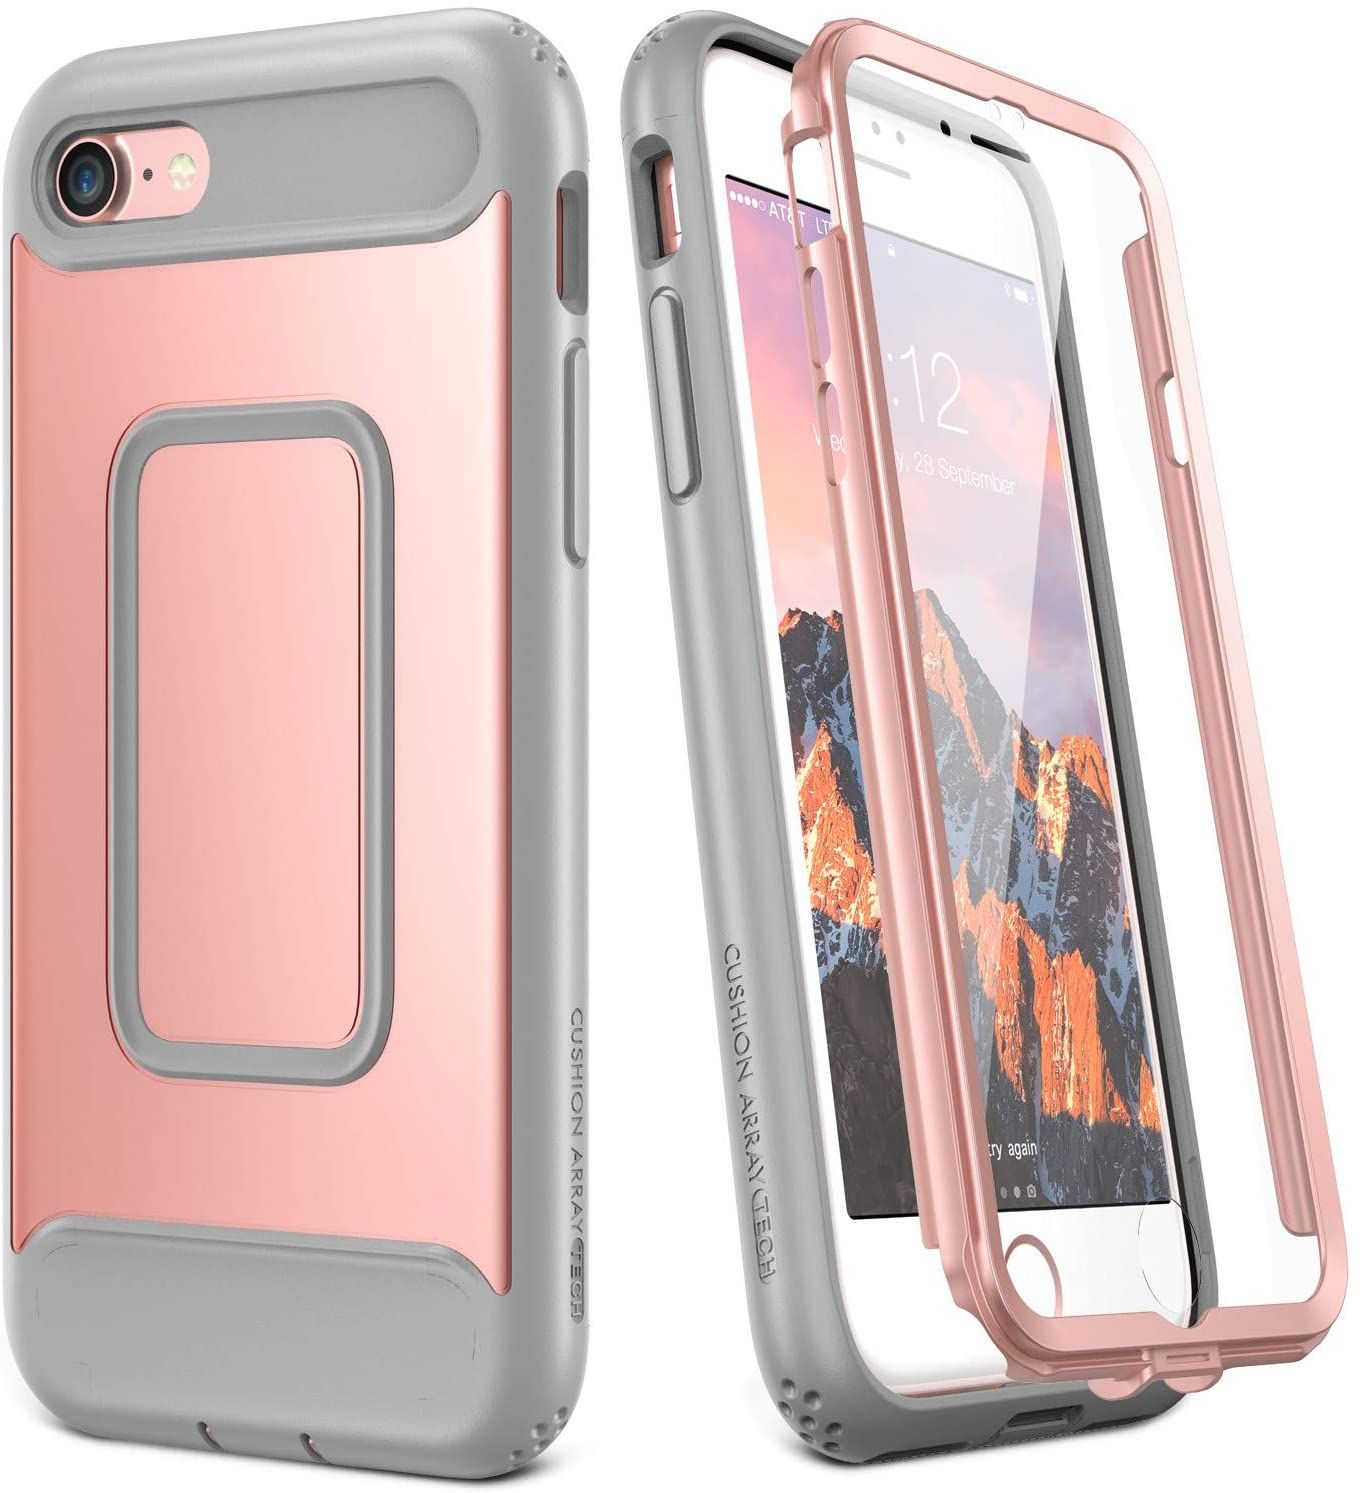 YOUMAKER Case for iPhone 8 1